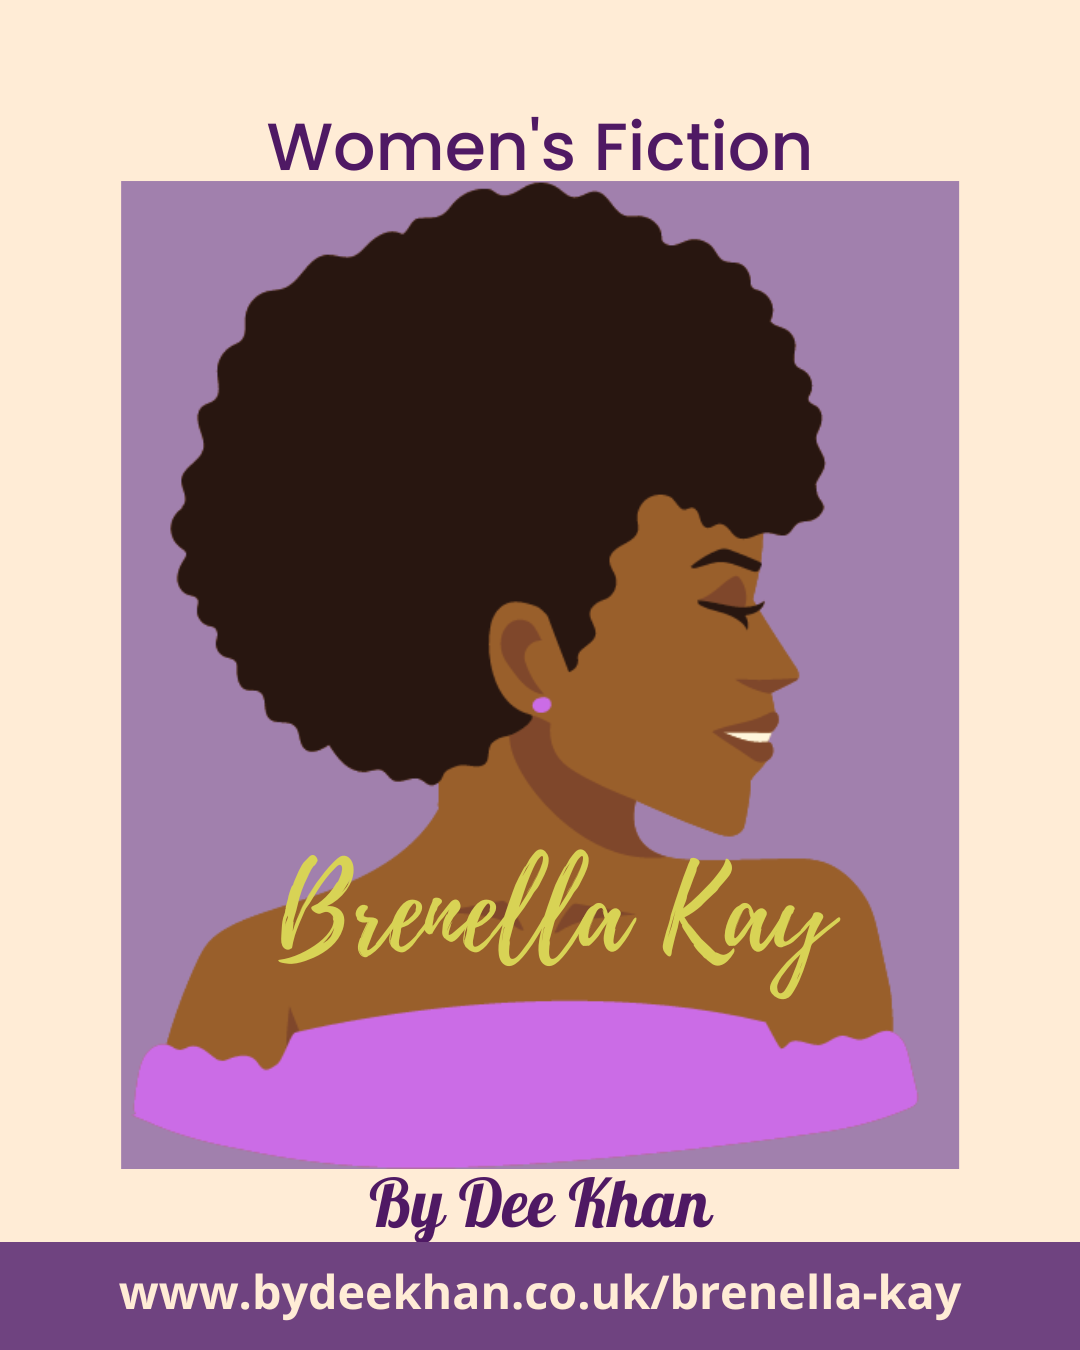 Top text reads Women's Fiction. Headshot profile image of smiling black woman with afro hair wearing a cerise off the shoulder top. Brenella Kay written across the headshot above the woman's top. By Dee Khan written underneath. Brenella Kay website page URL across the bottom of the image.